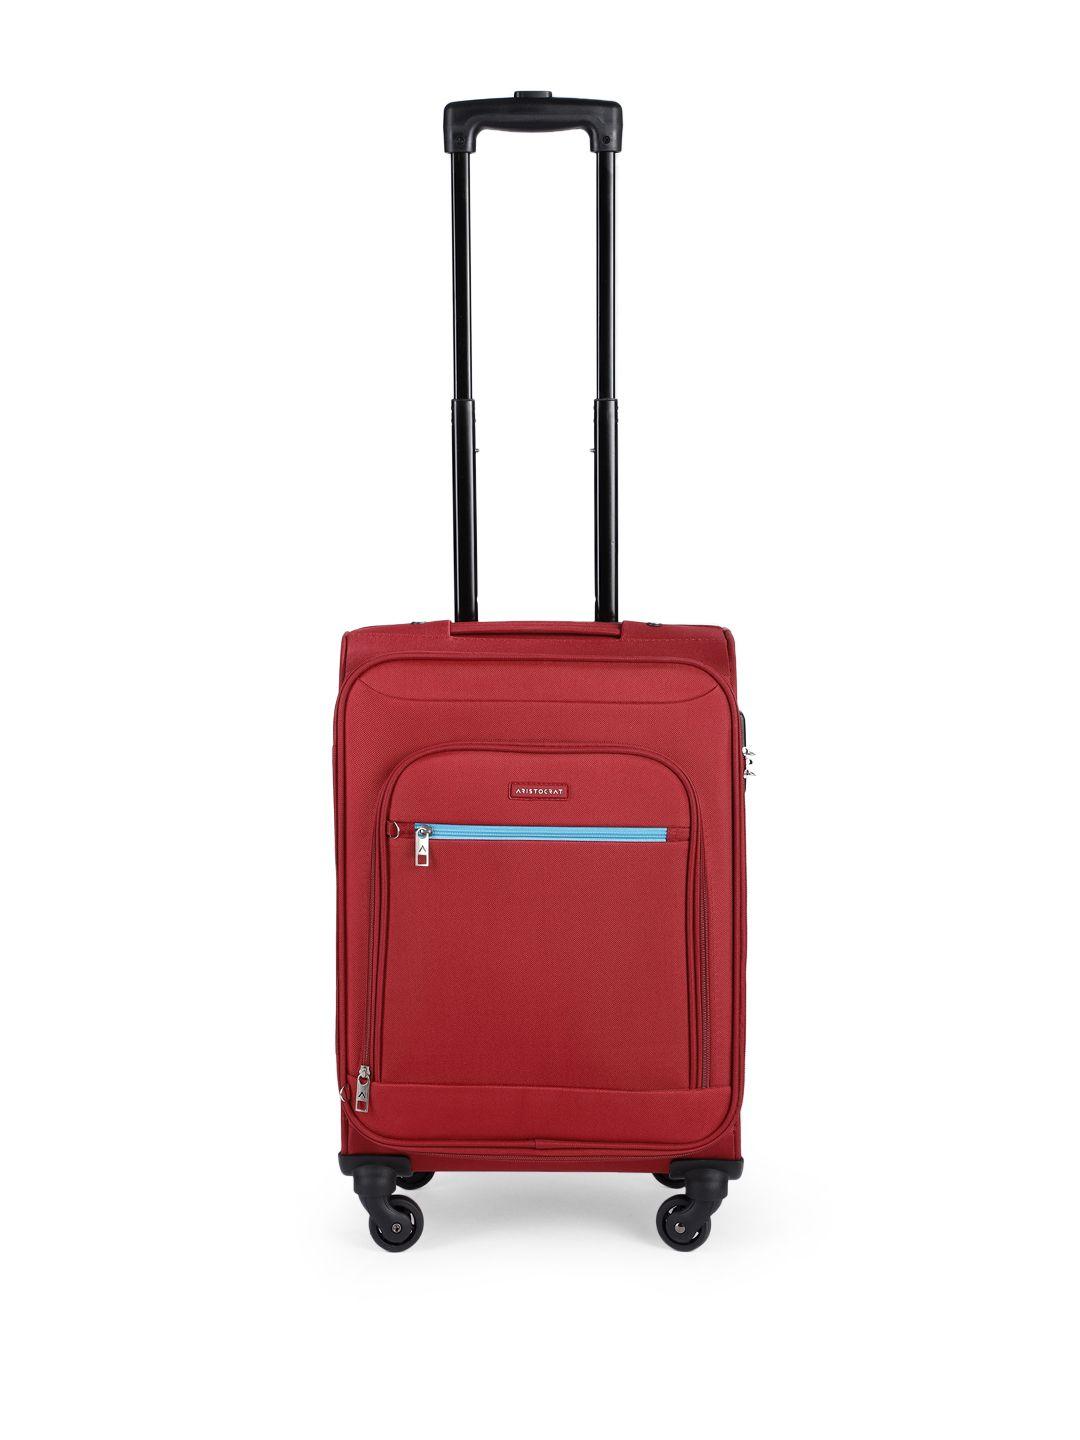 aristocrat solid nile exp strolly cabin trolley suitcase - 54 cm